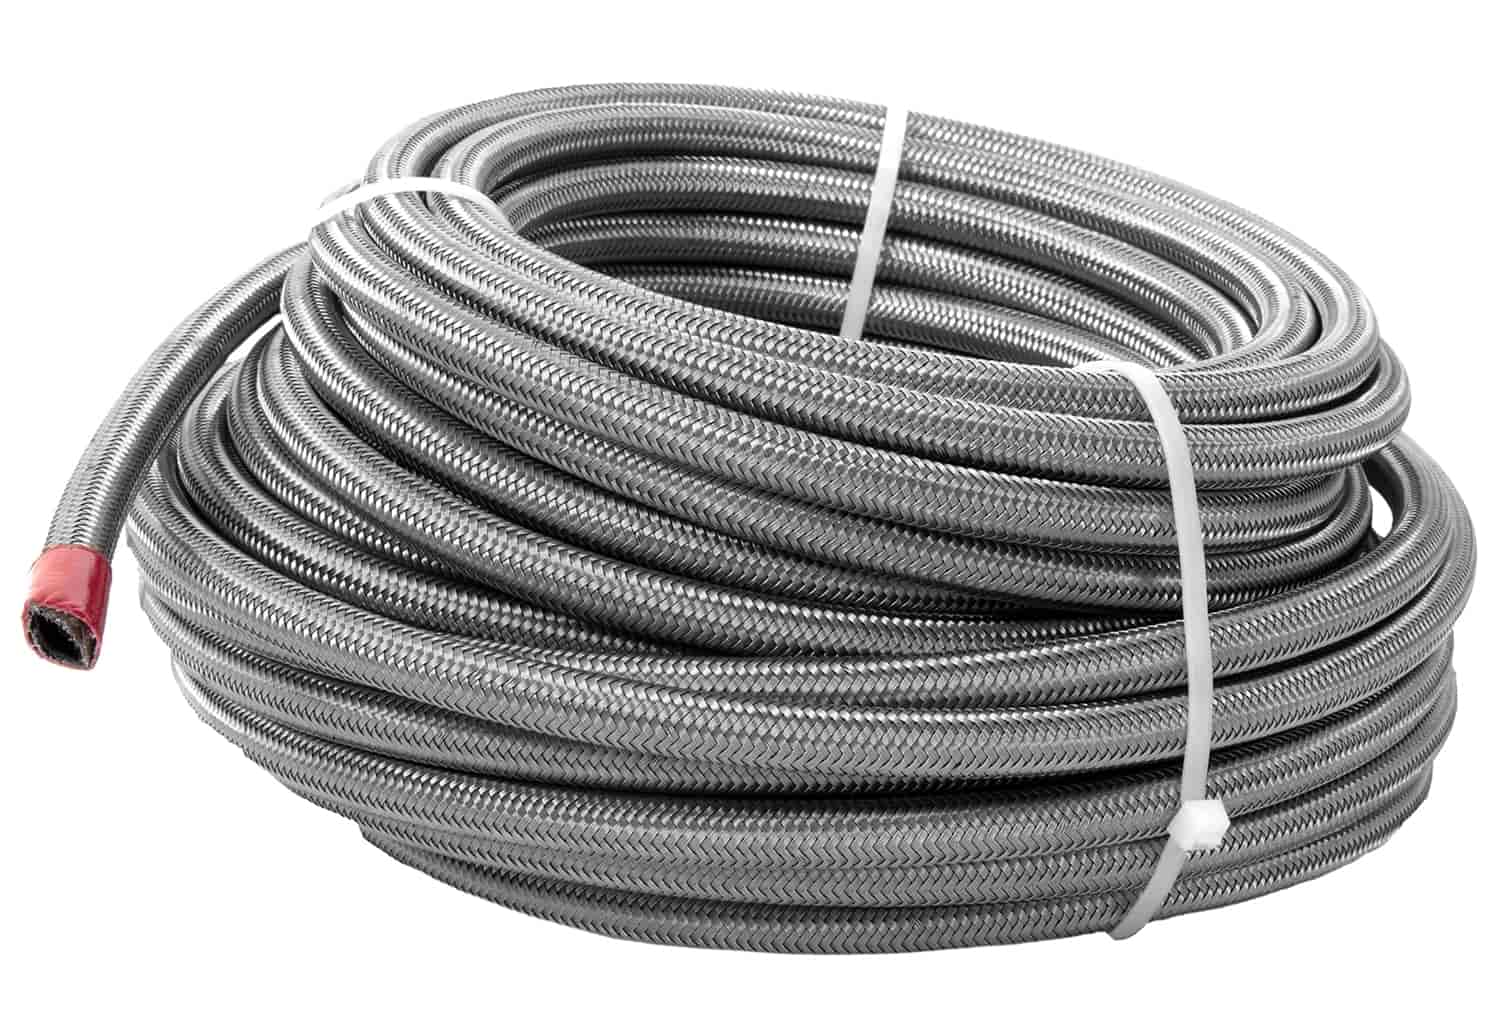 Braided Stainless Steel PTFE Fuel Hose -8 AN x 8 ft